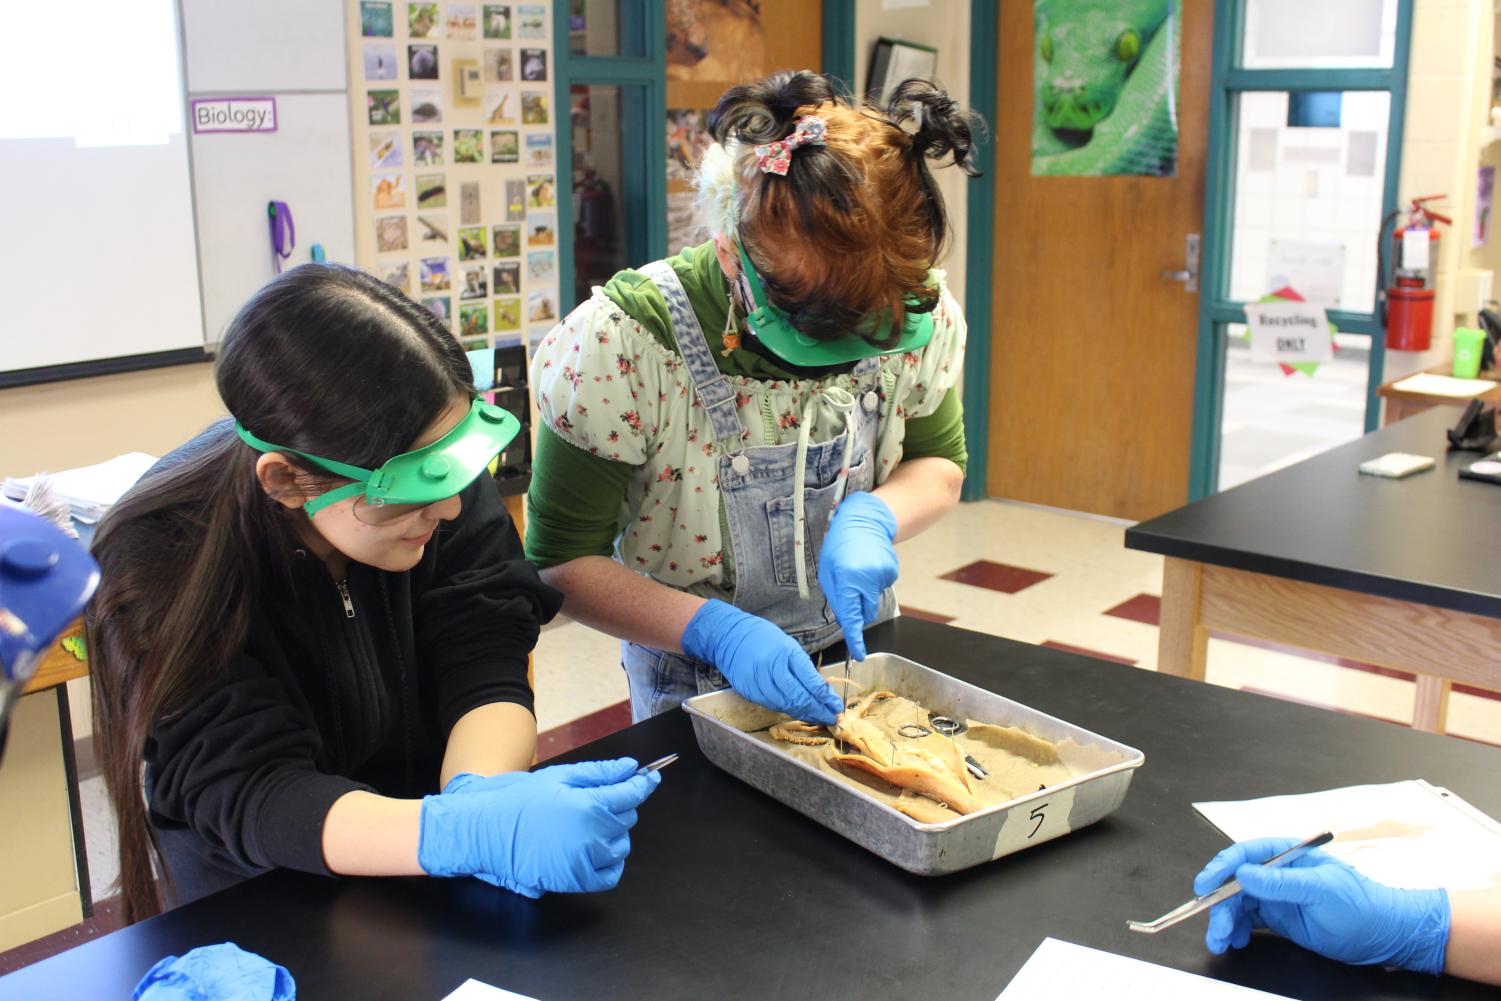 Zoology+dissects+squids+%28Photos+by+Shaye+Comes%29